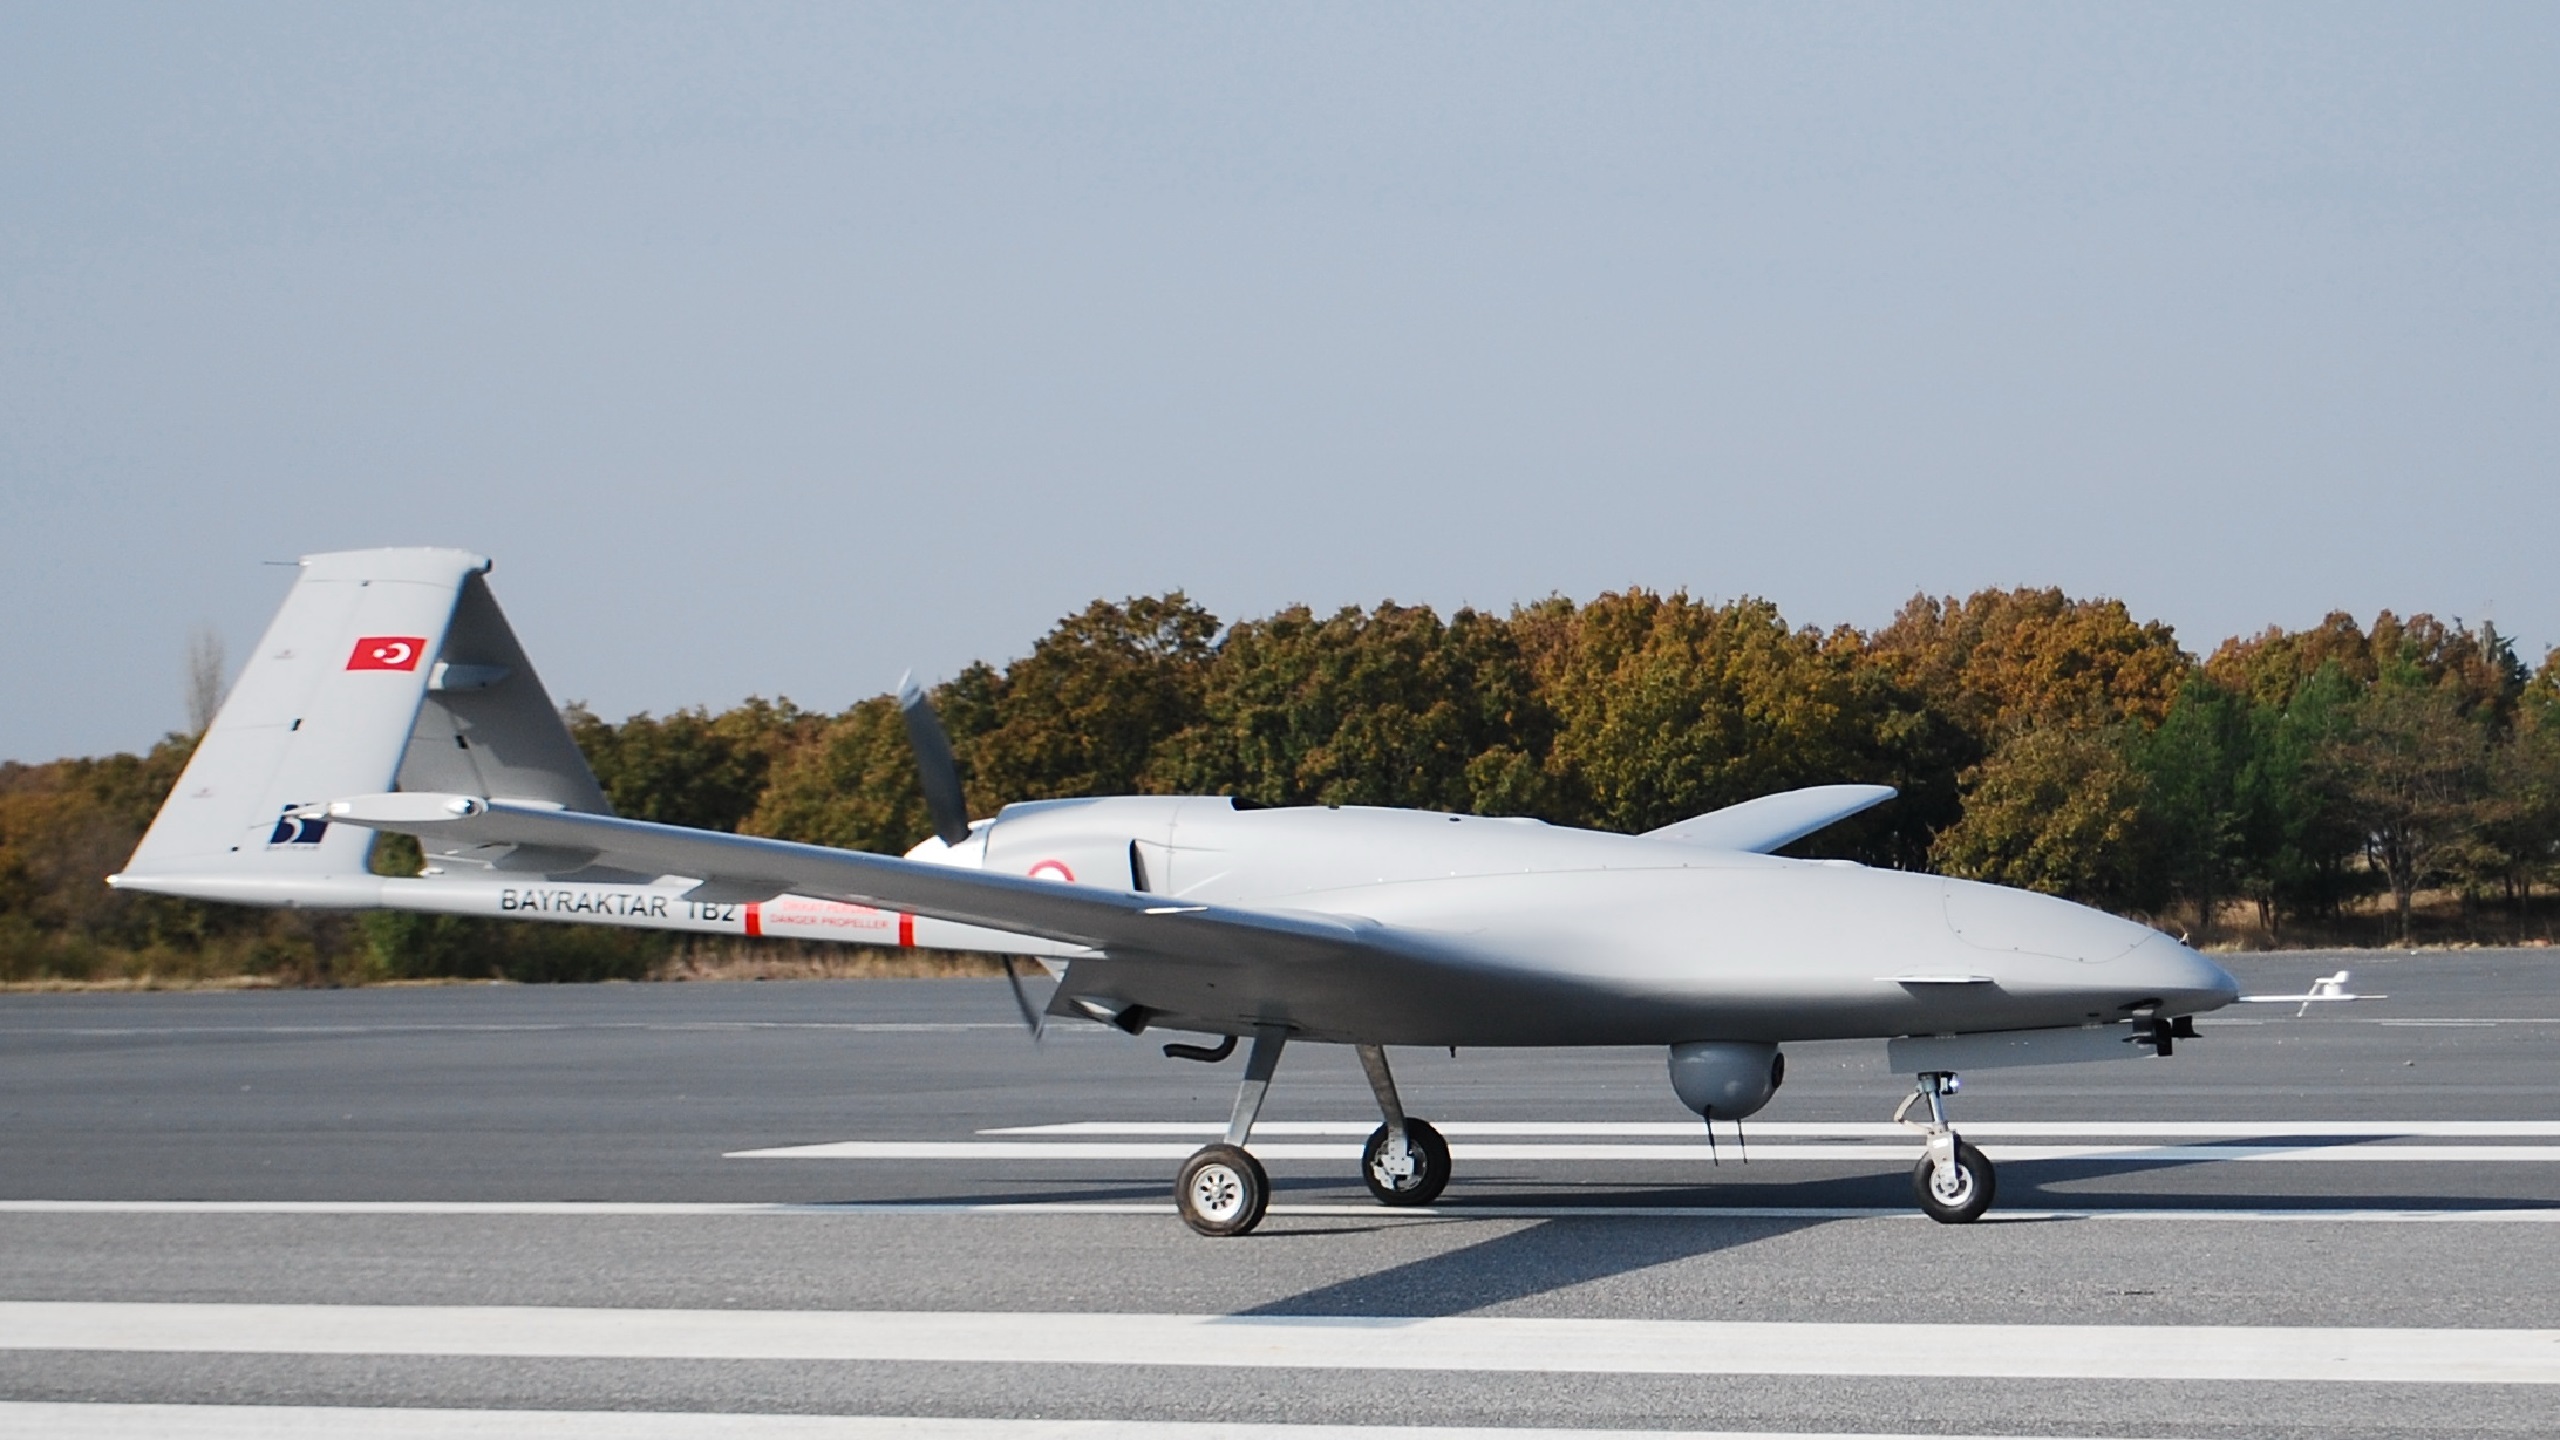 Turkish Weapons Company Baykar Sold 20 Armed Drones to UAE